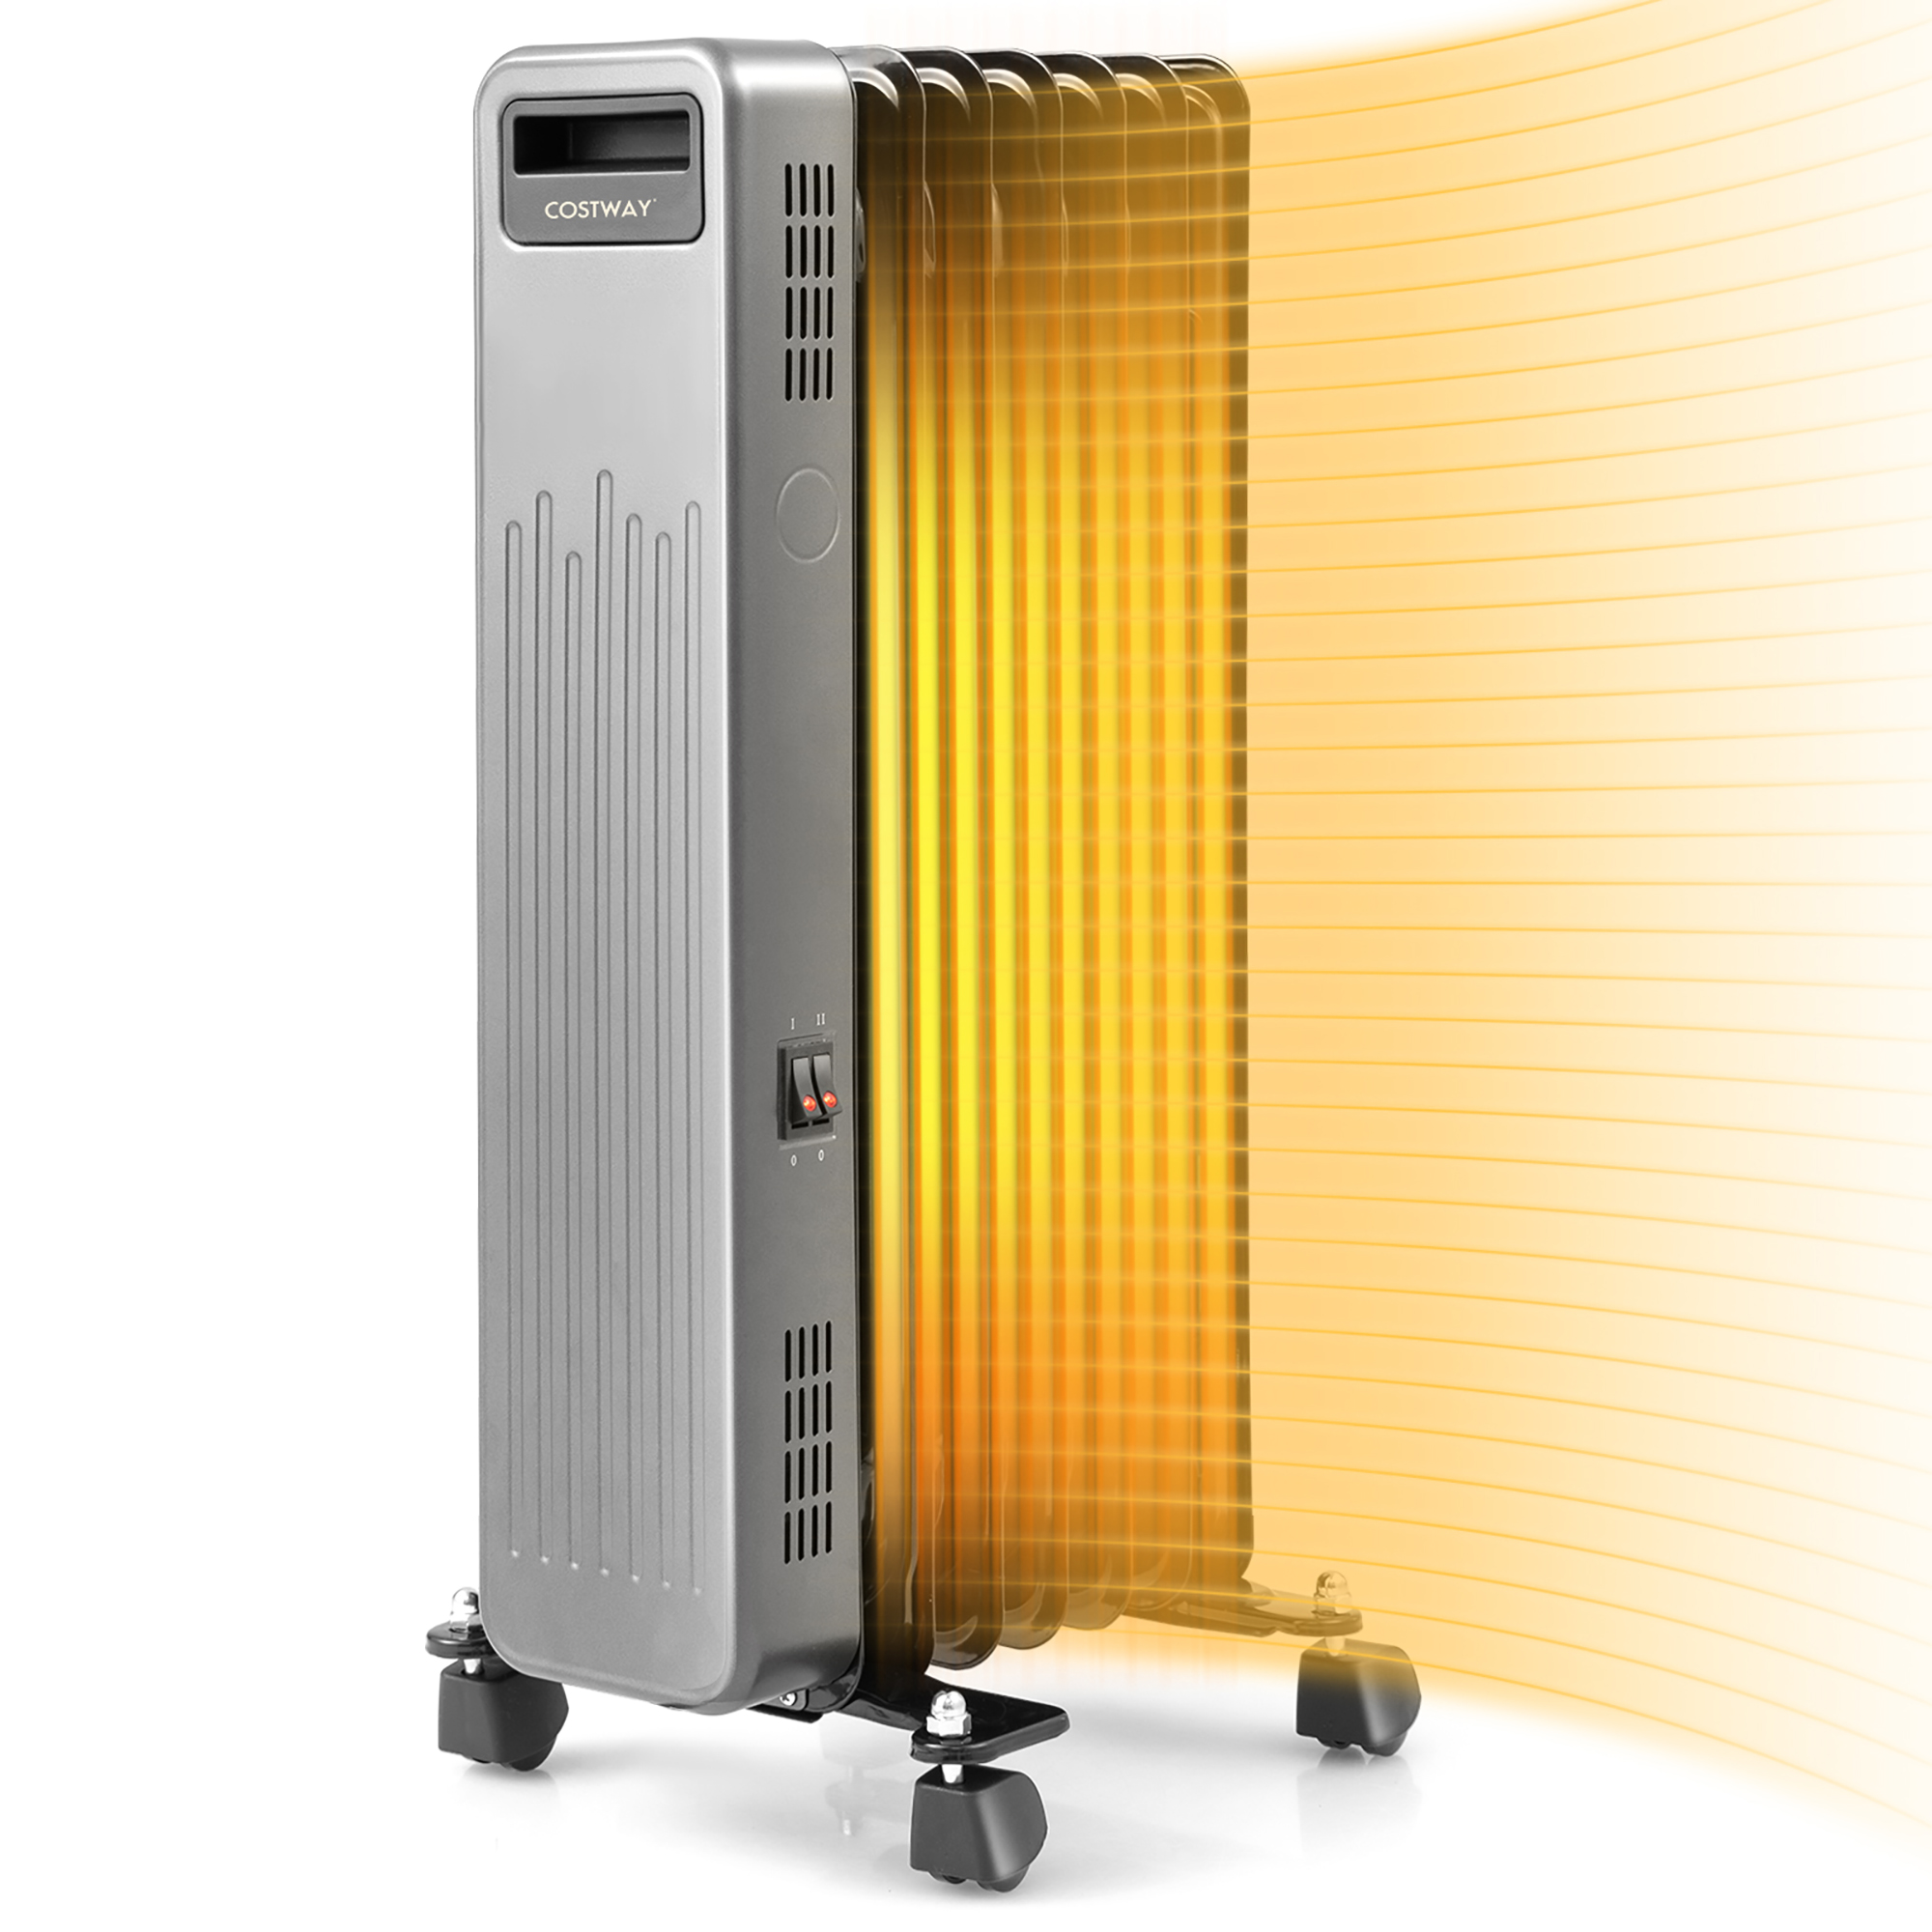 Costway 1500W Oil-Filled Radiator Heater Portable Electric Space